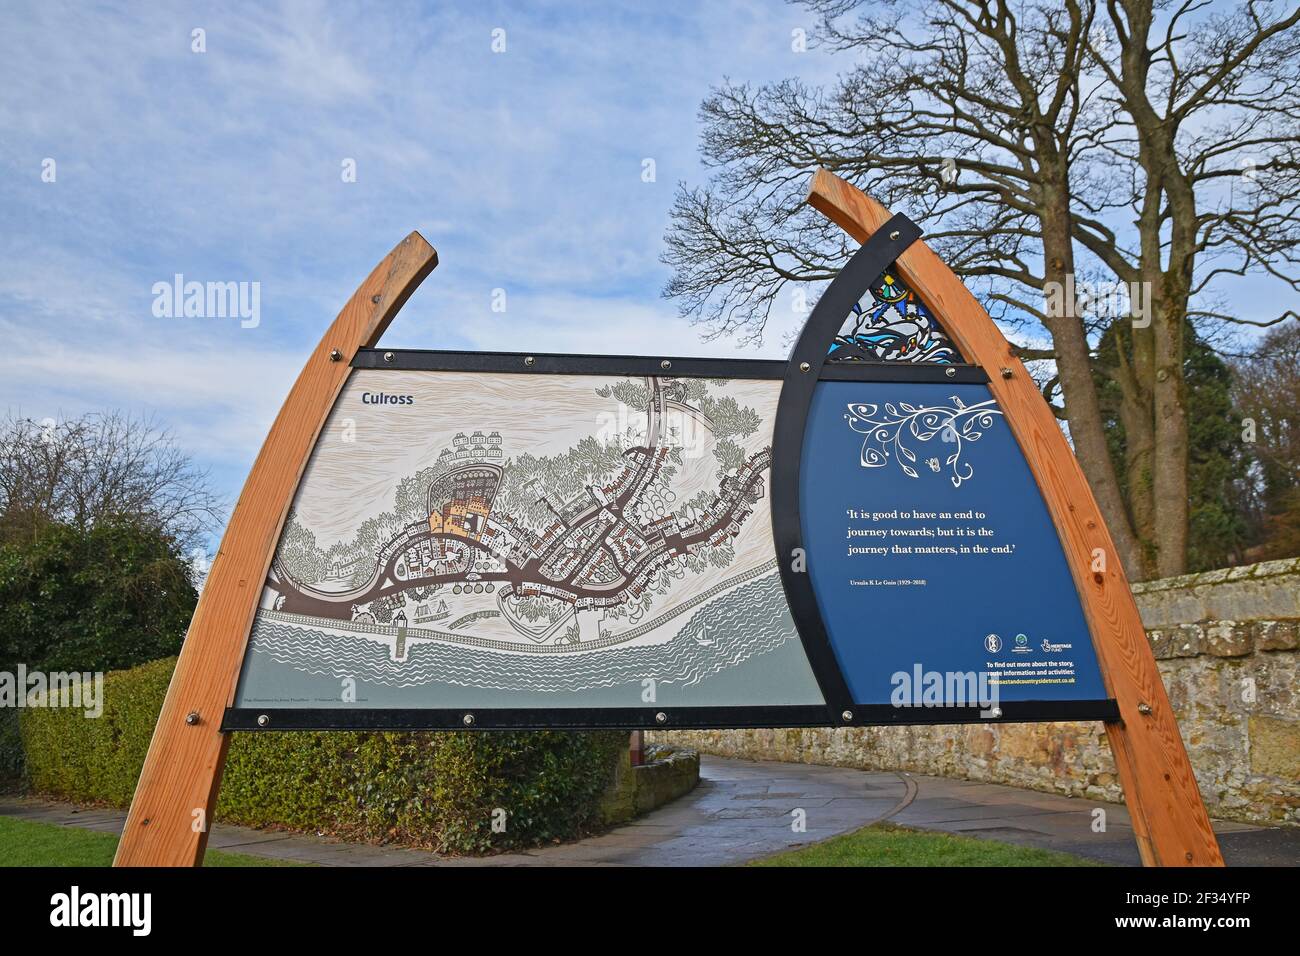 Information board with map and quote about travel at Culross, Fife, Scotland. This is at the start of the Pilgrims Way, on Fife Coastal Path. Stock Photo